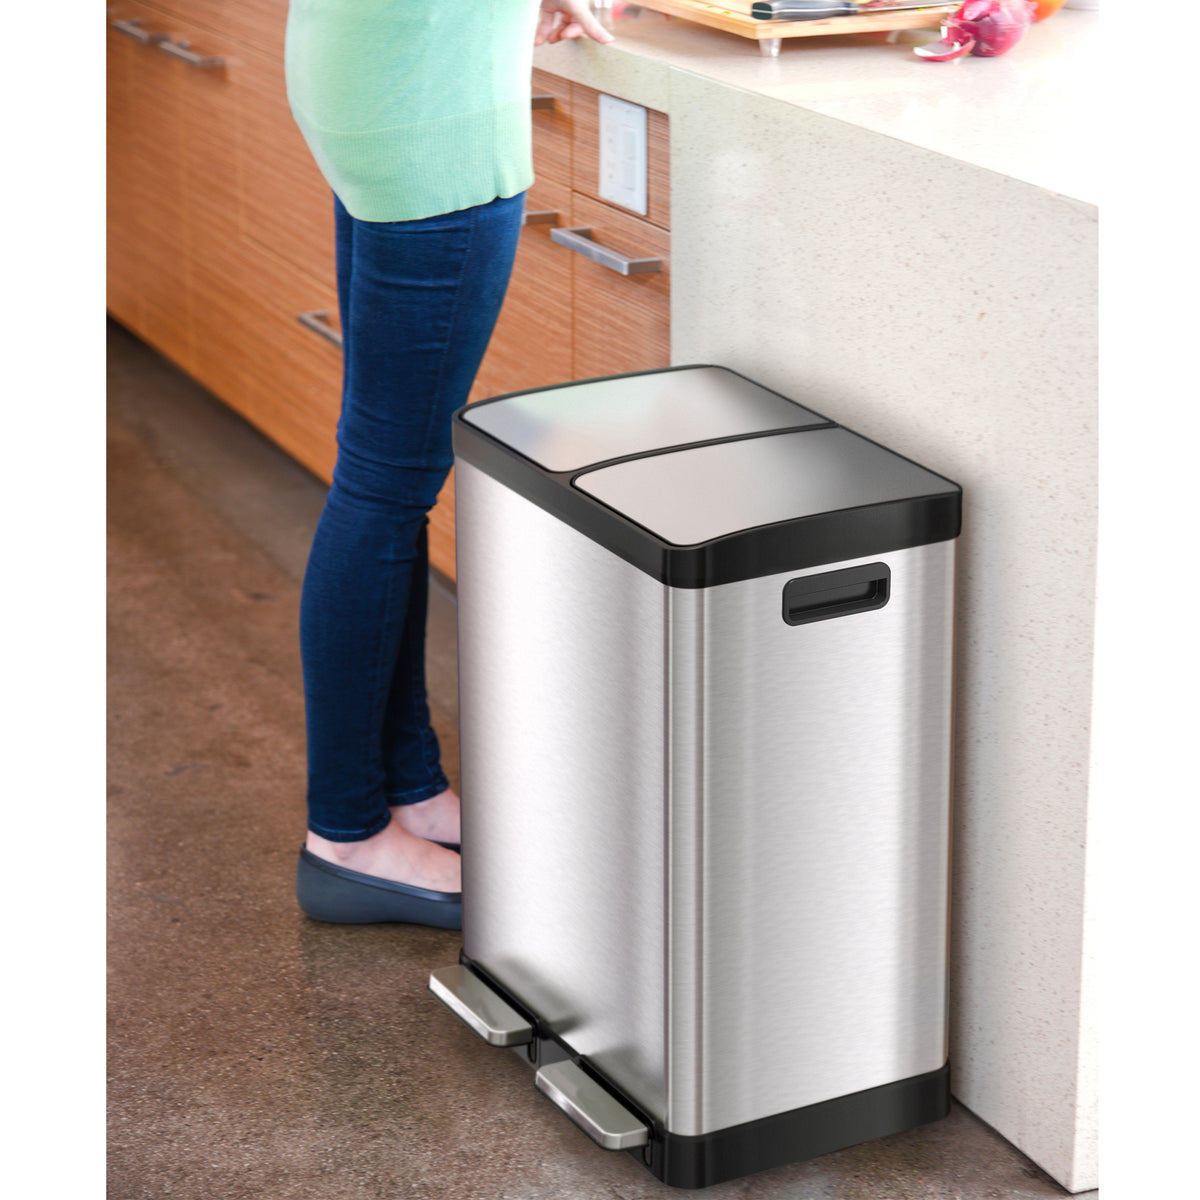 16 Gallon / 60 Liter SoftStep Dual Compartment Trash Can and Recycle Bin in kitchen